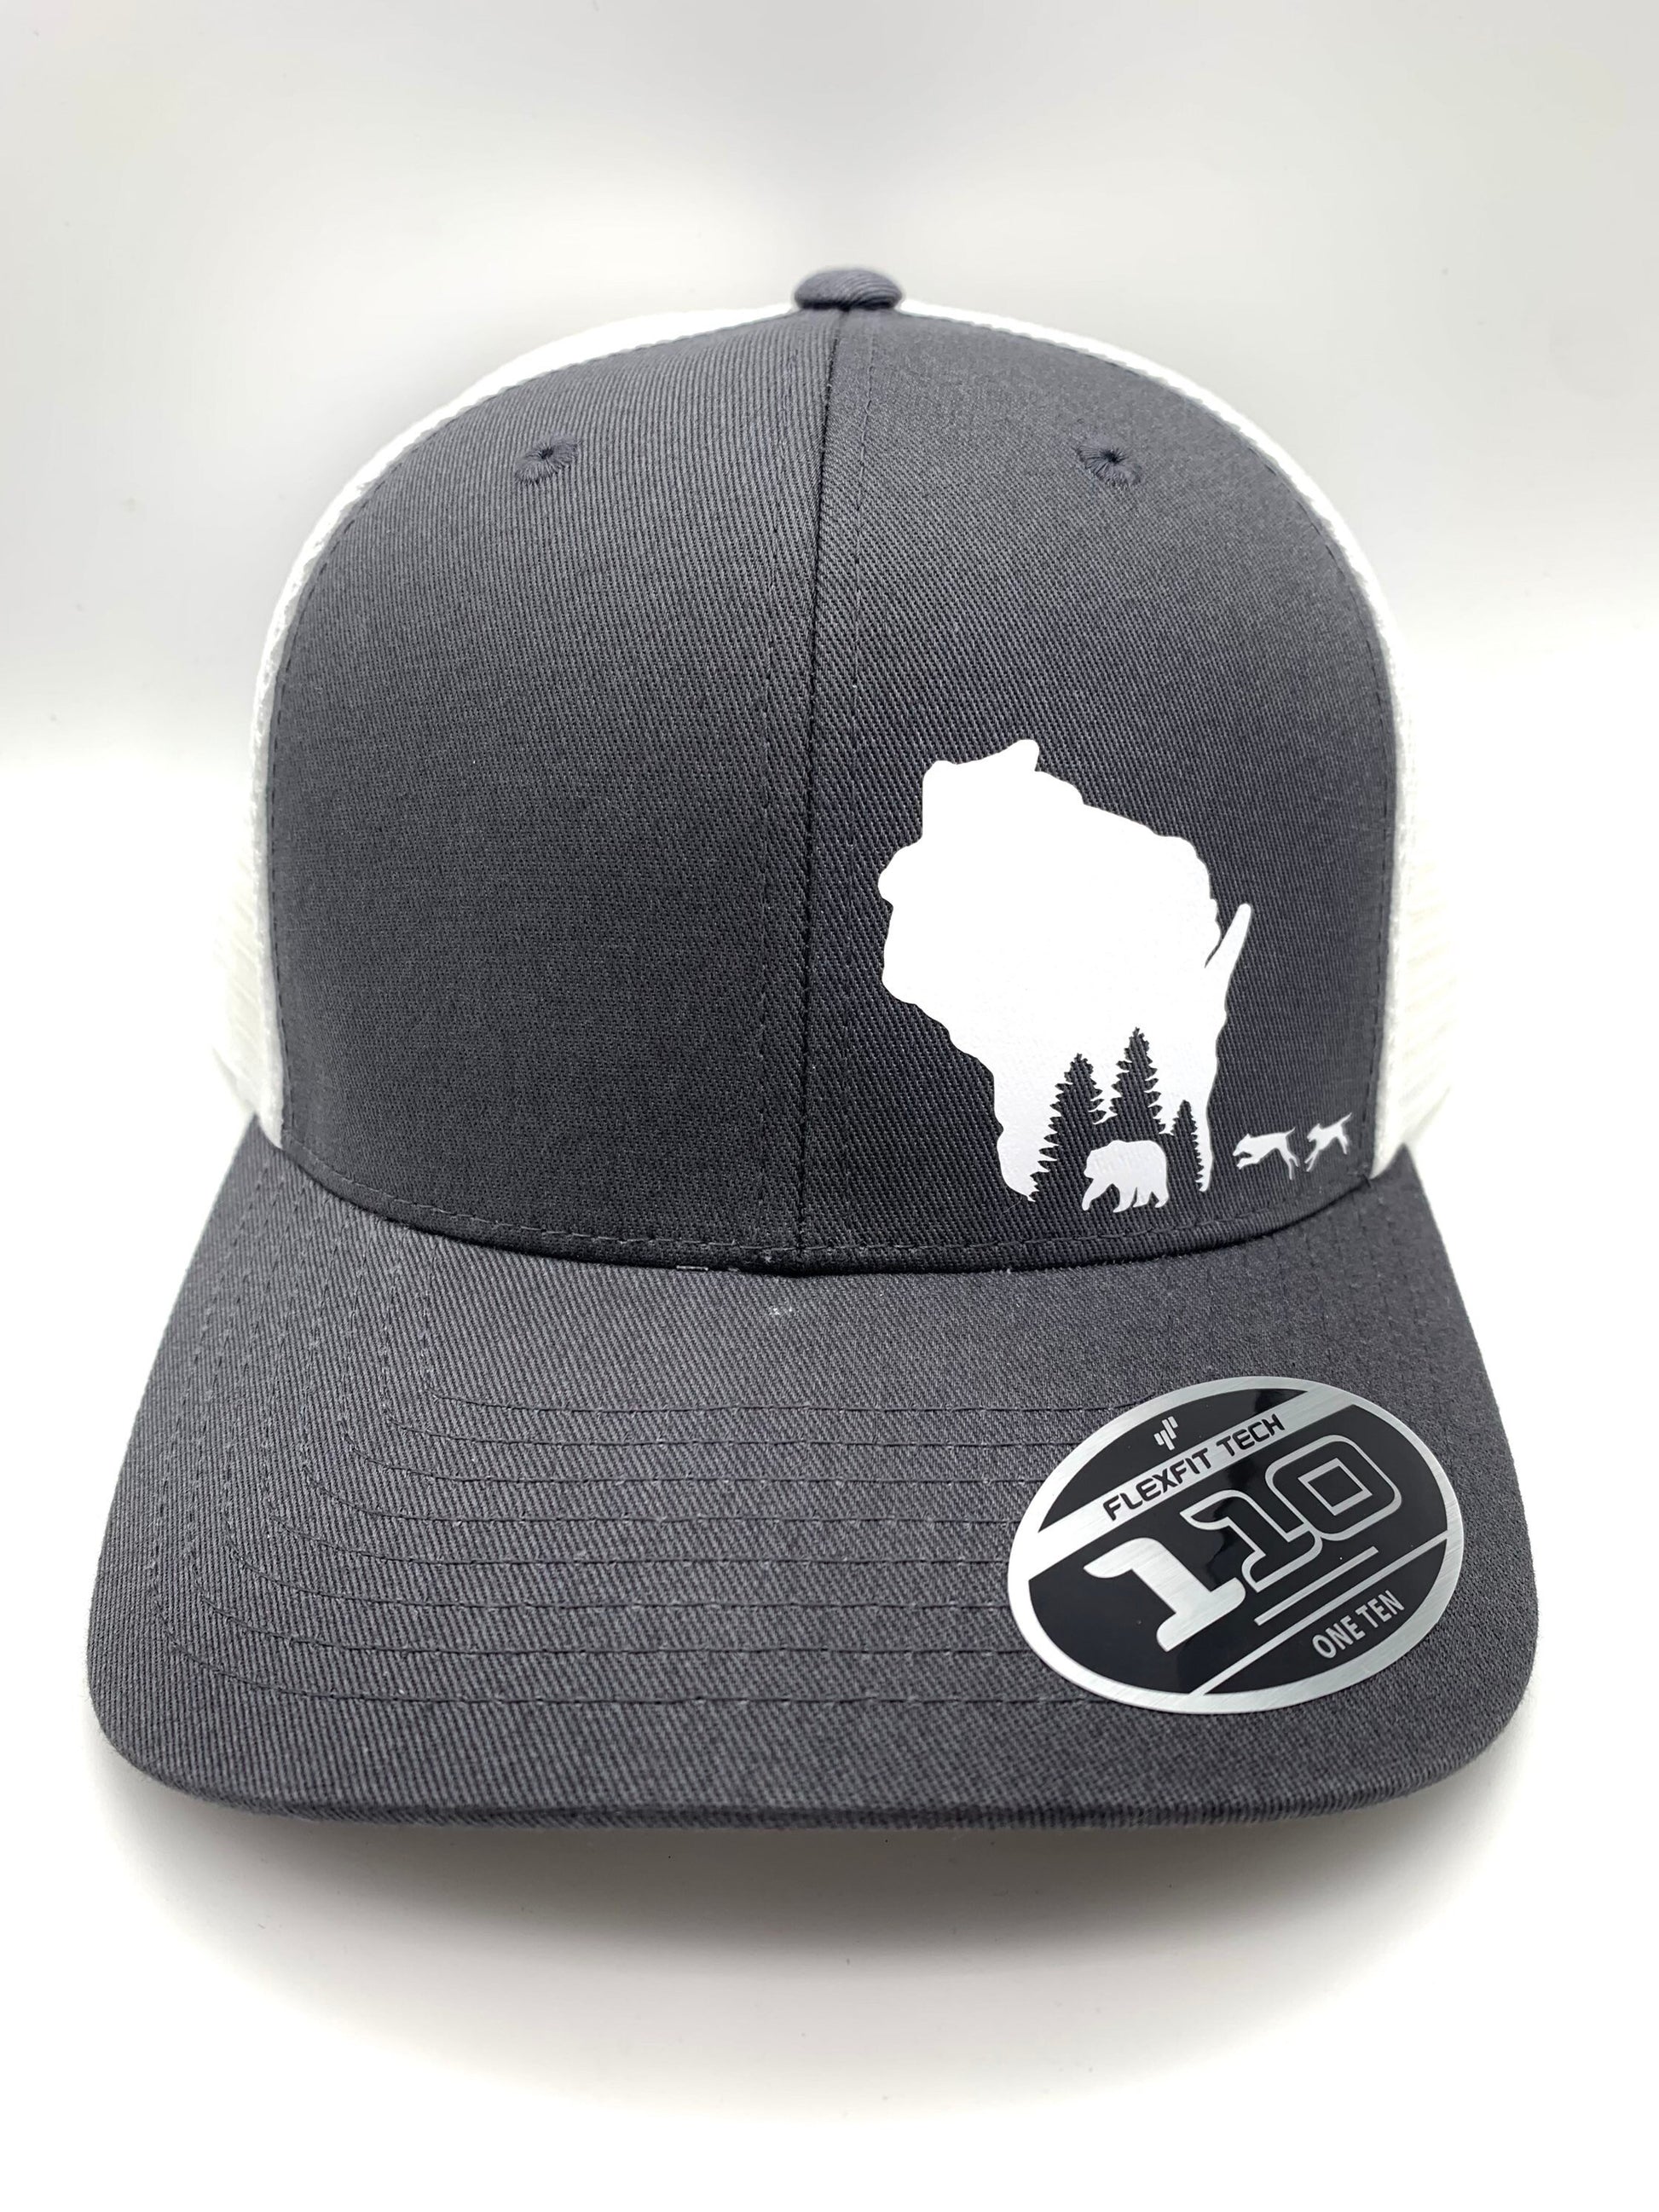 Any State Bear Hunting and Hounds Flexfit 110 Snap Back Adjustable Hat in various colors